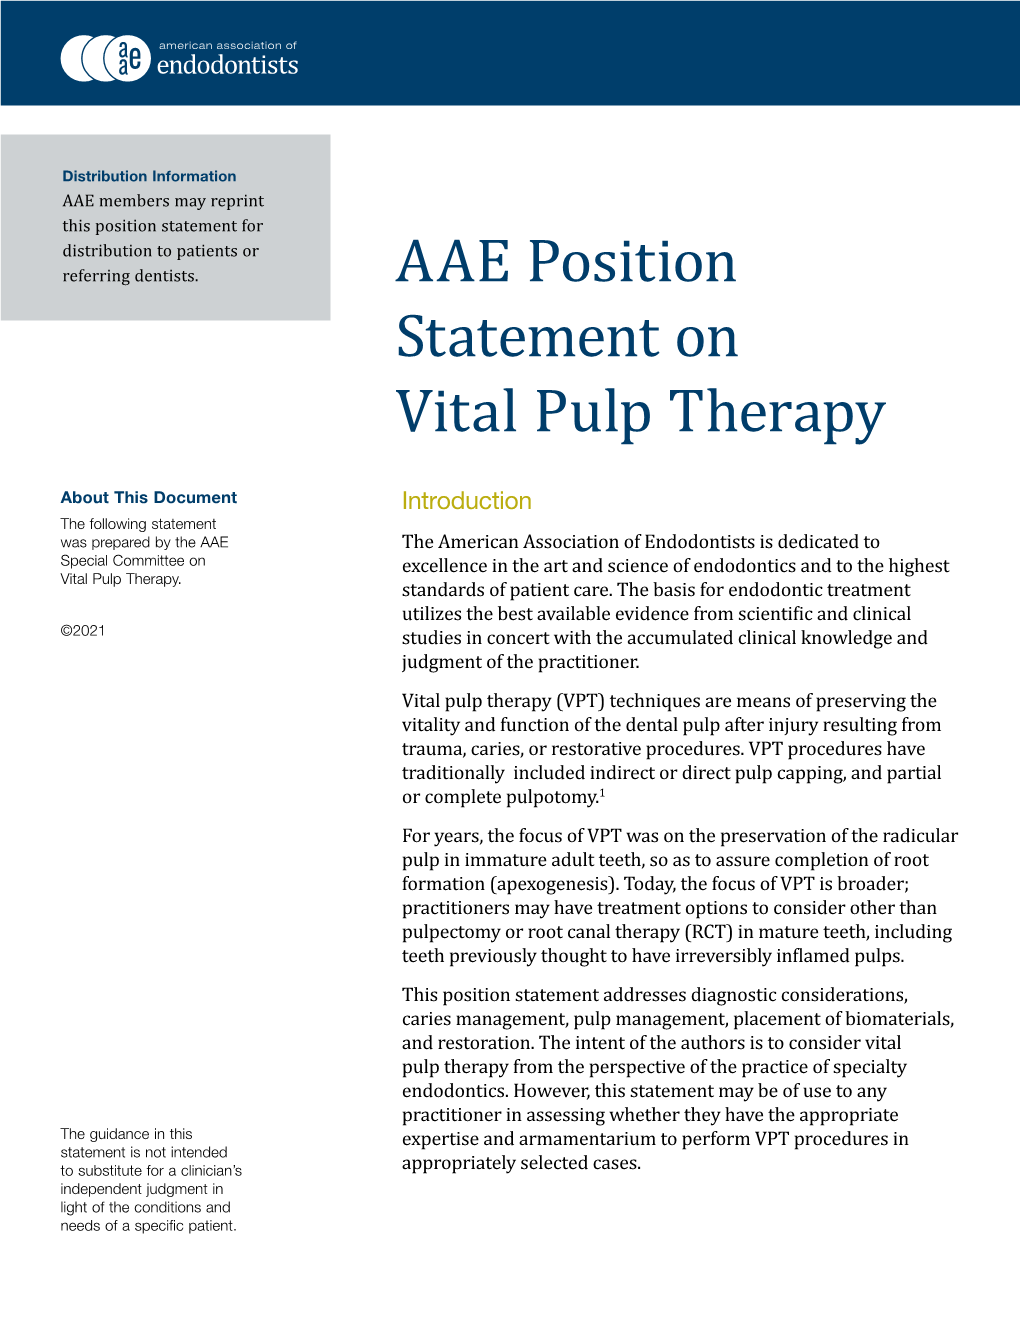 AAE Position Statement on Vital Pulp Therapy